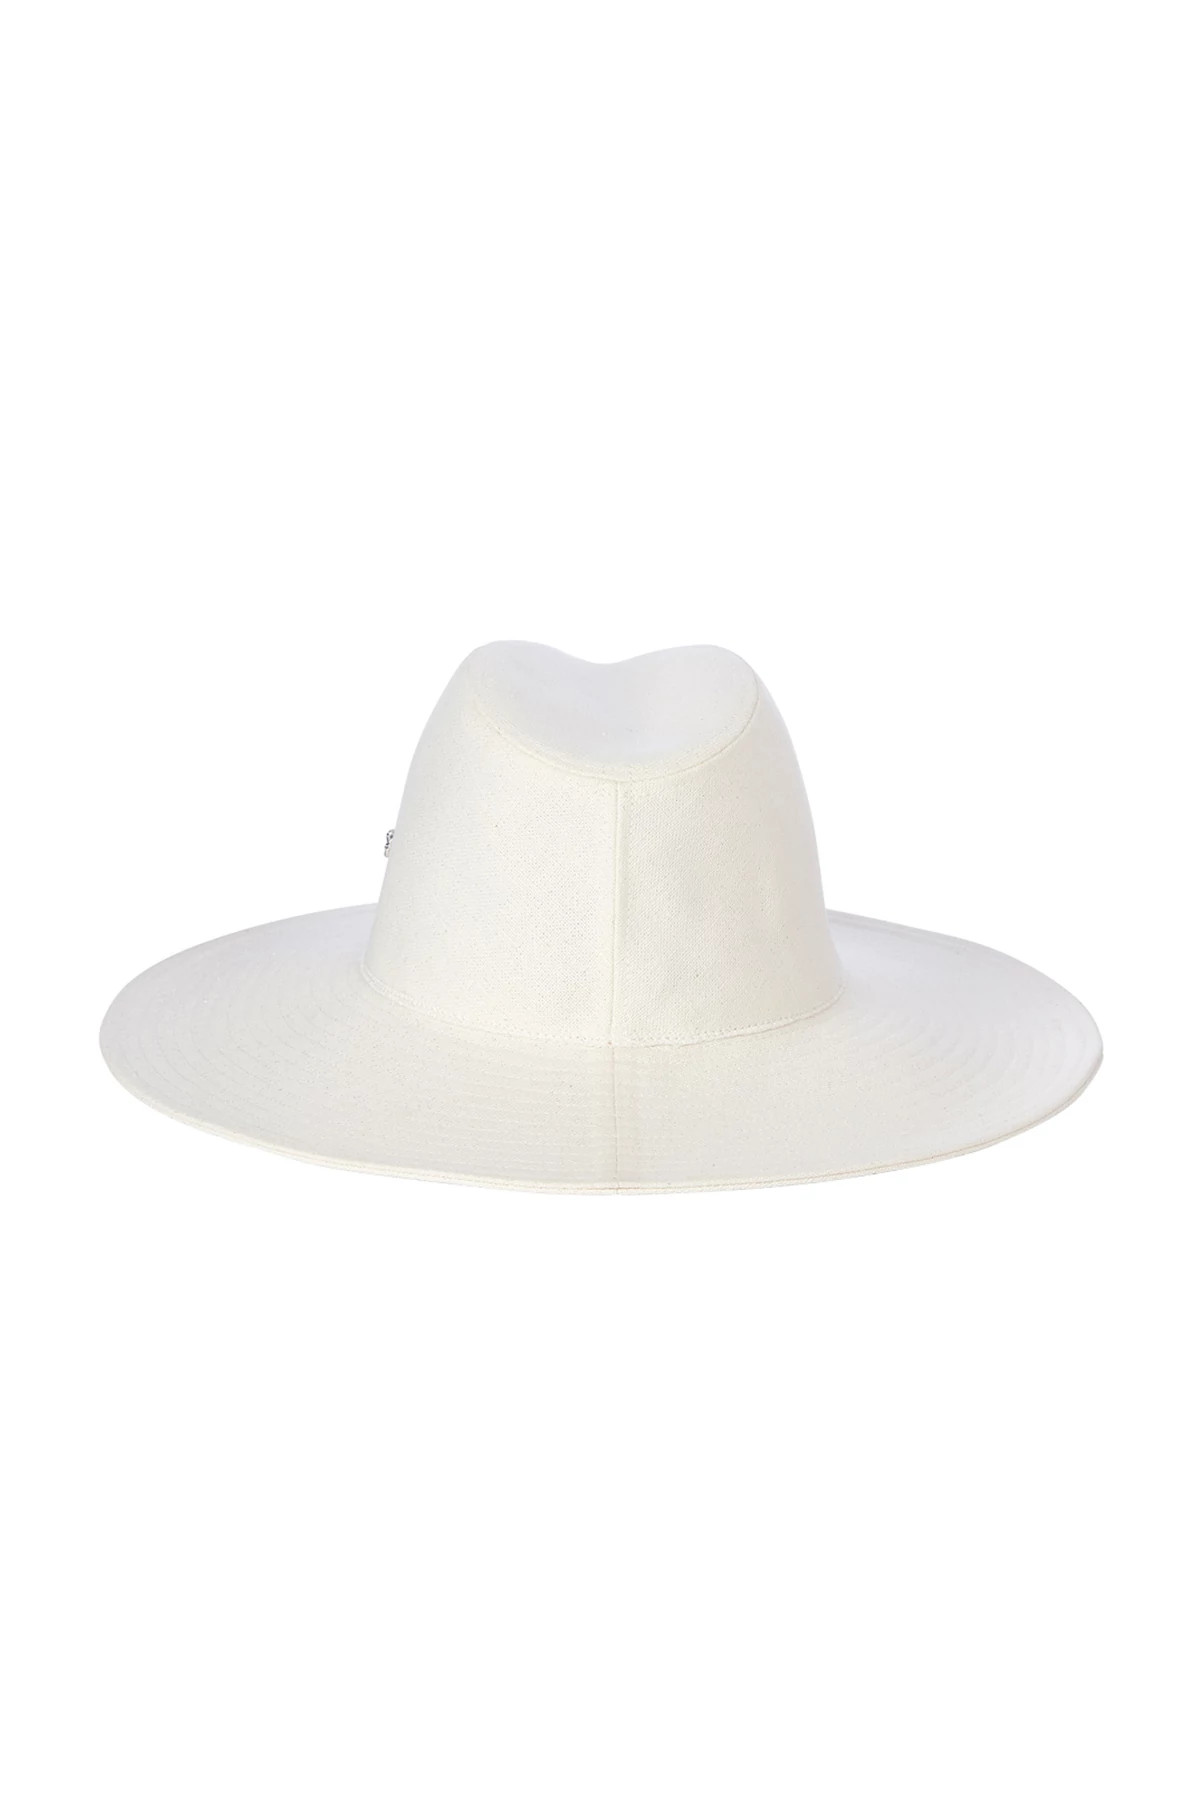 WHITE/SILVER Violetta Panama Hat image number 2